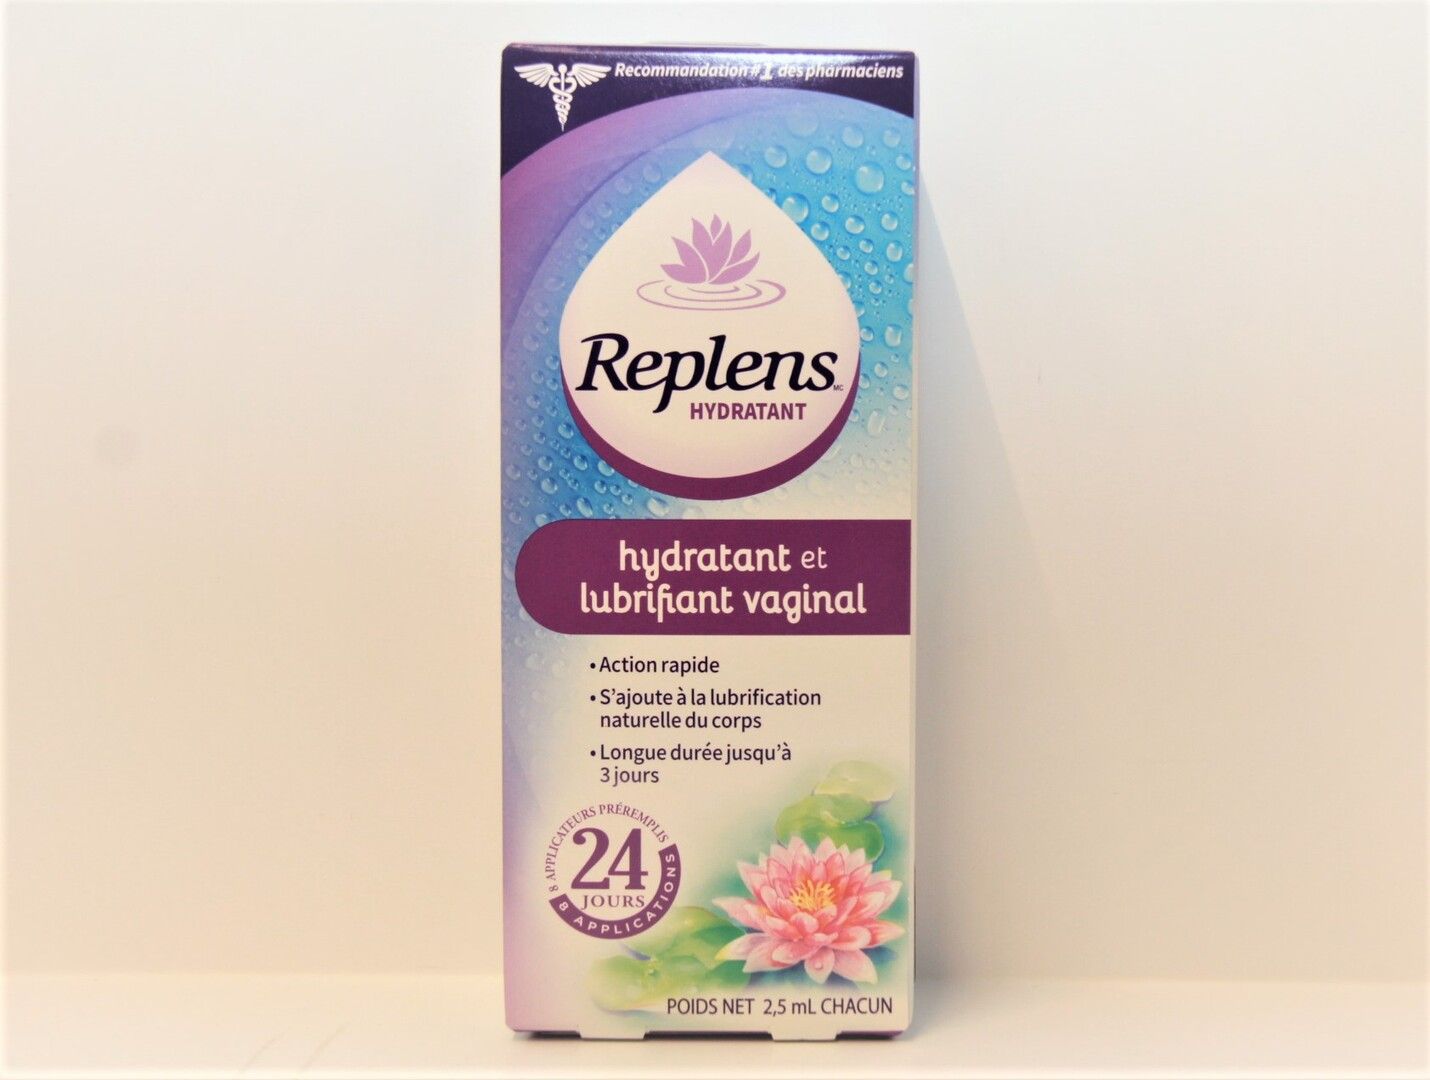 Pharmacie Ploy - Nguyen Trong - Parapharmacie Replens Gel Vaginal Hydratant  8 Unidoses/2,5g - CHENÔVE